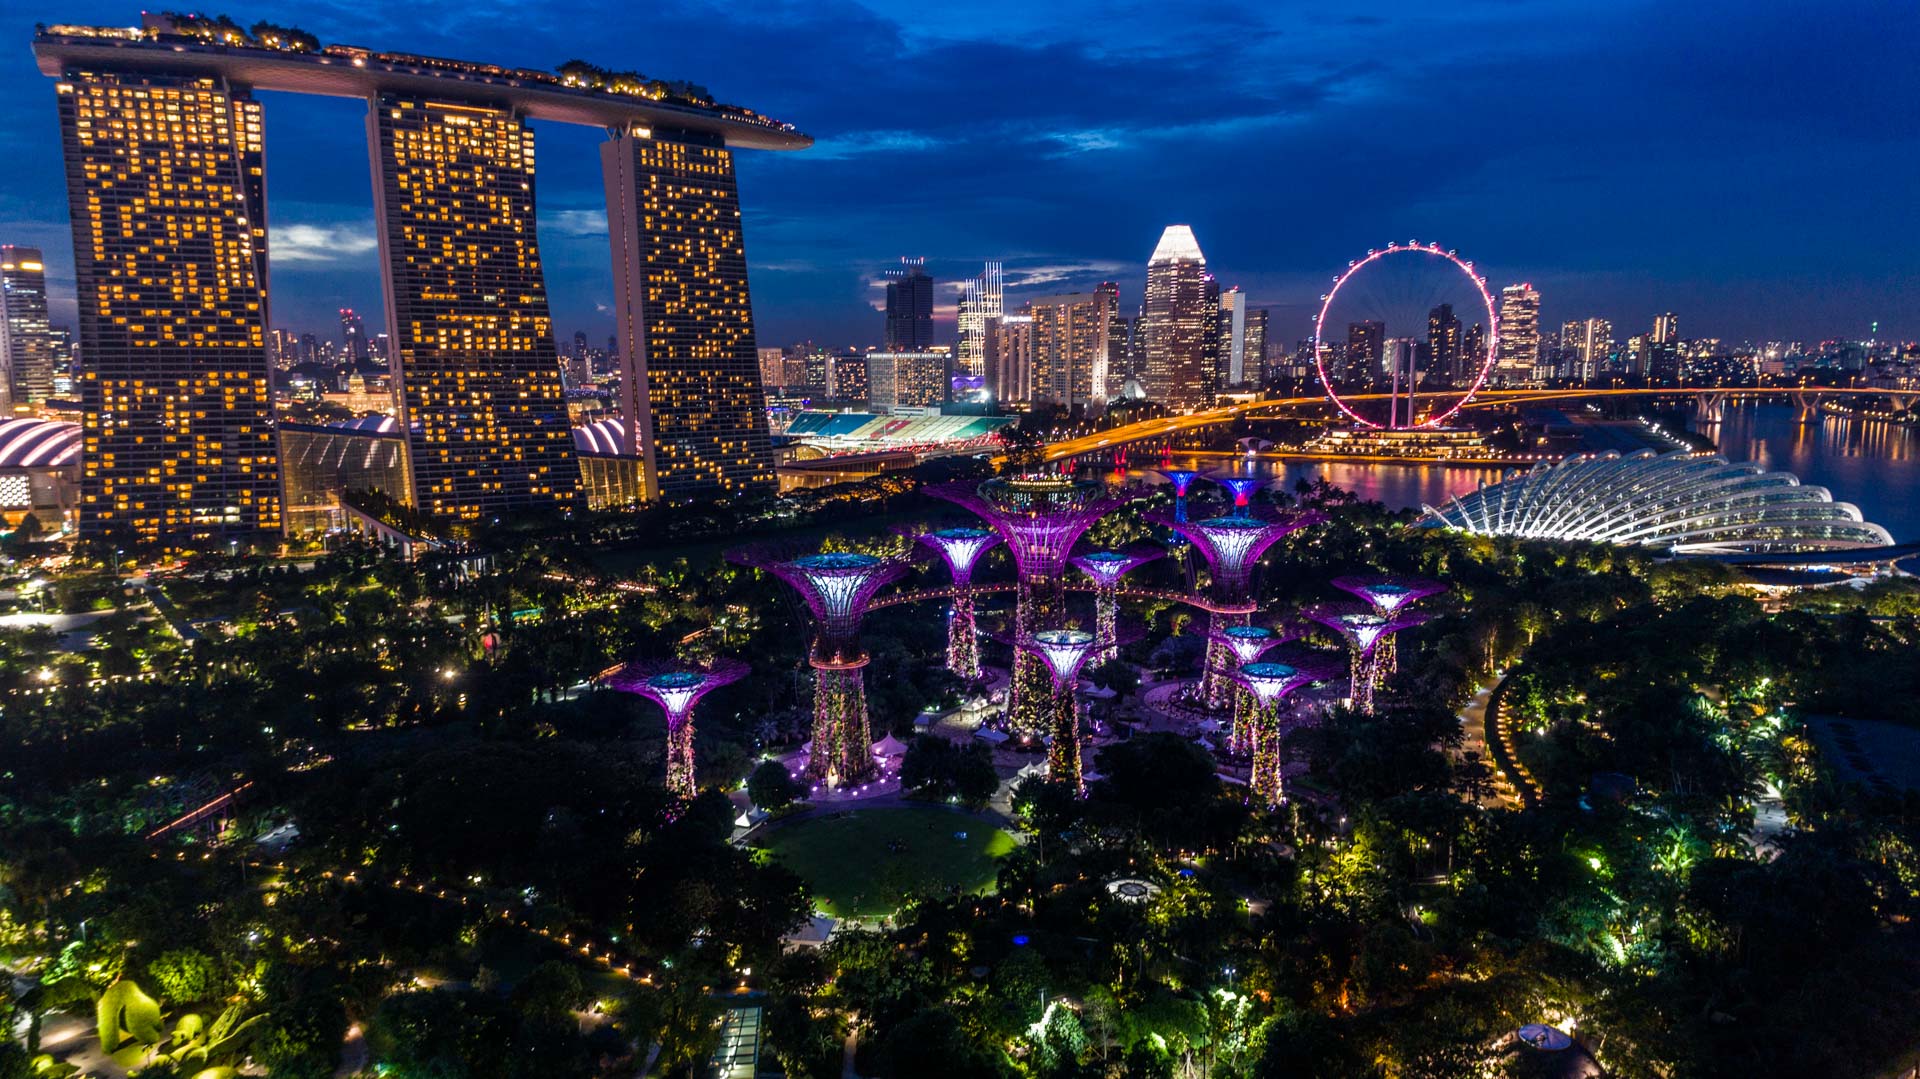 Singapore Pescart Enrico Pescantini Gardens by the Bay Marina Bay Sands nightscape drone 3